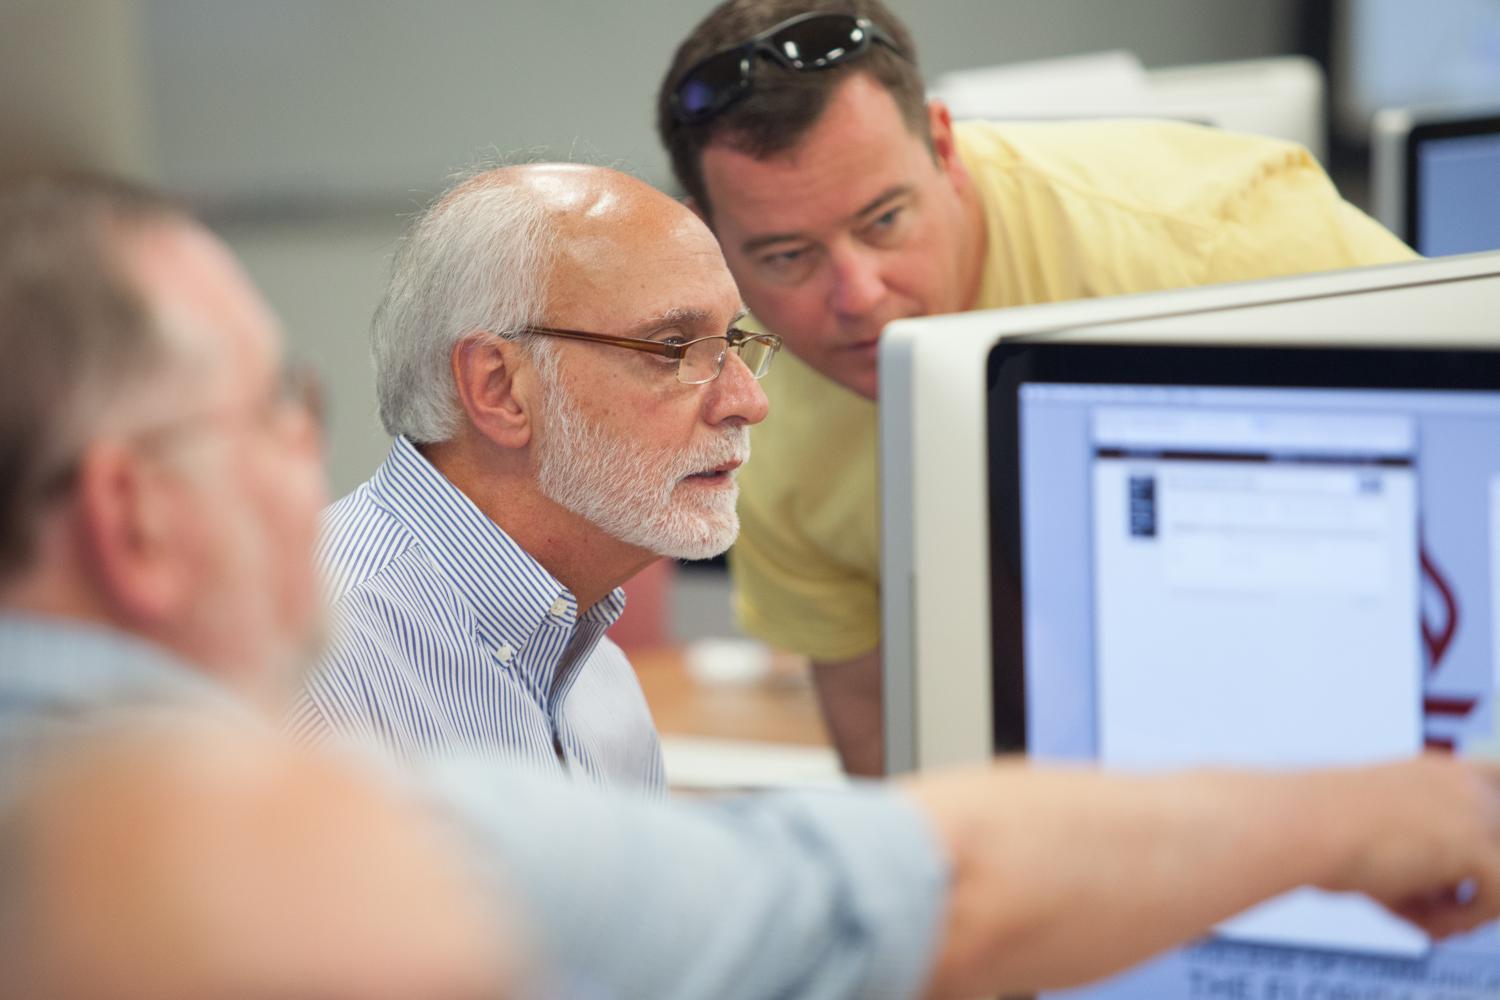 "Three older men seated at a table, scrutinizing information on computer monitors"